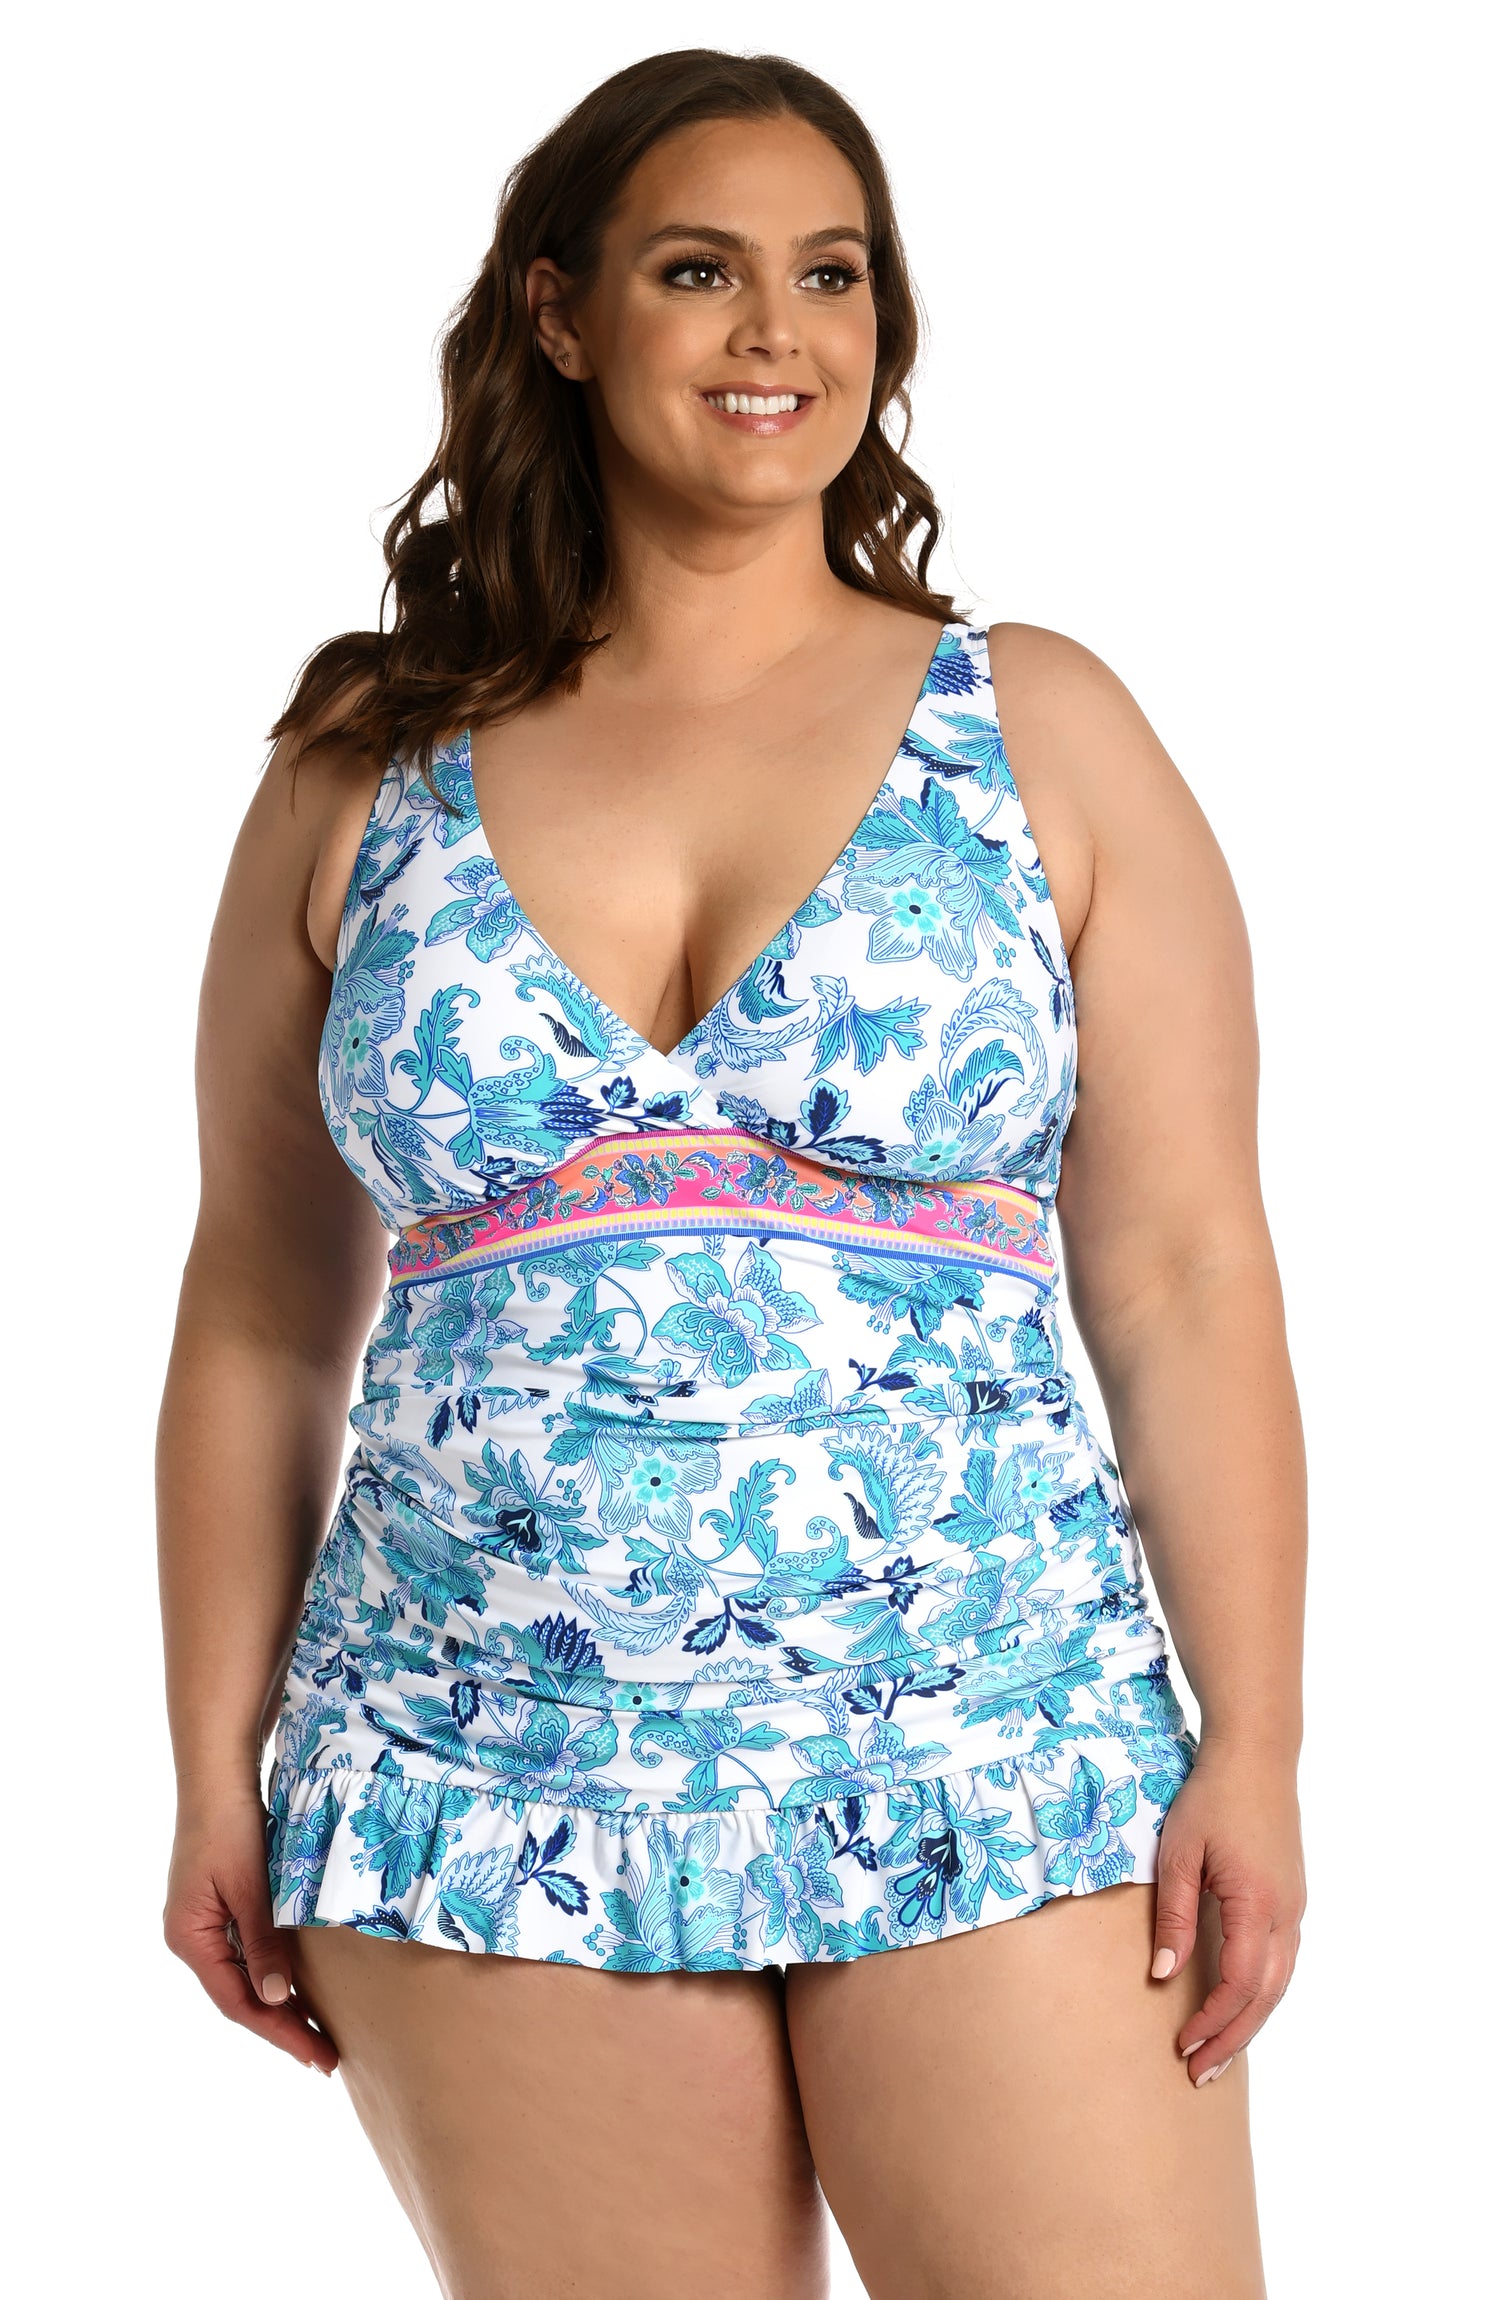 Model is wearing a light blue multi colored mediterranean printed halter tankini top from our Santorini Sun collection!